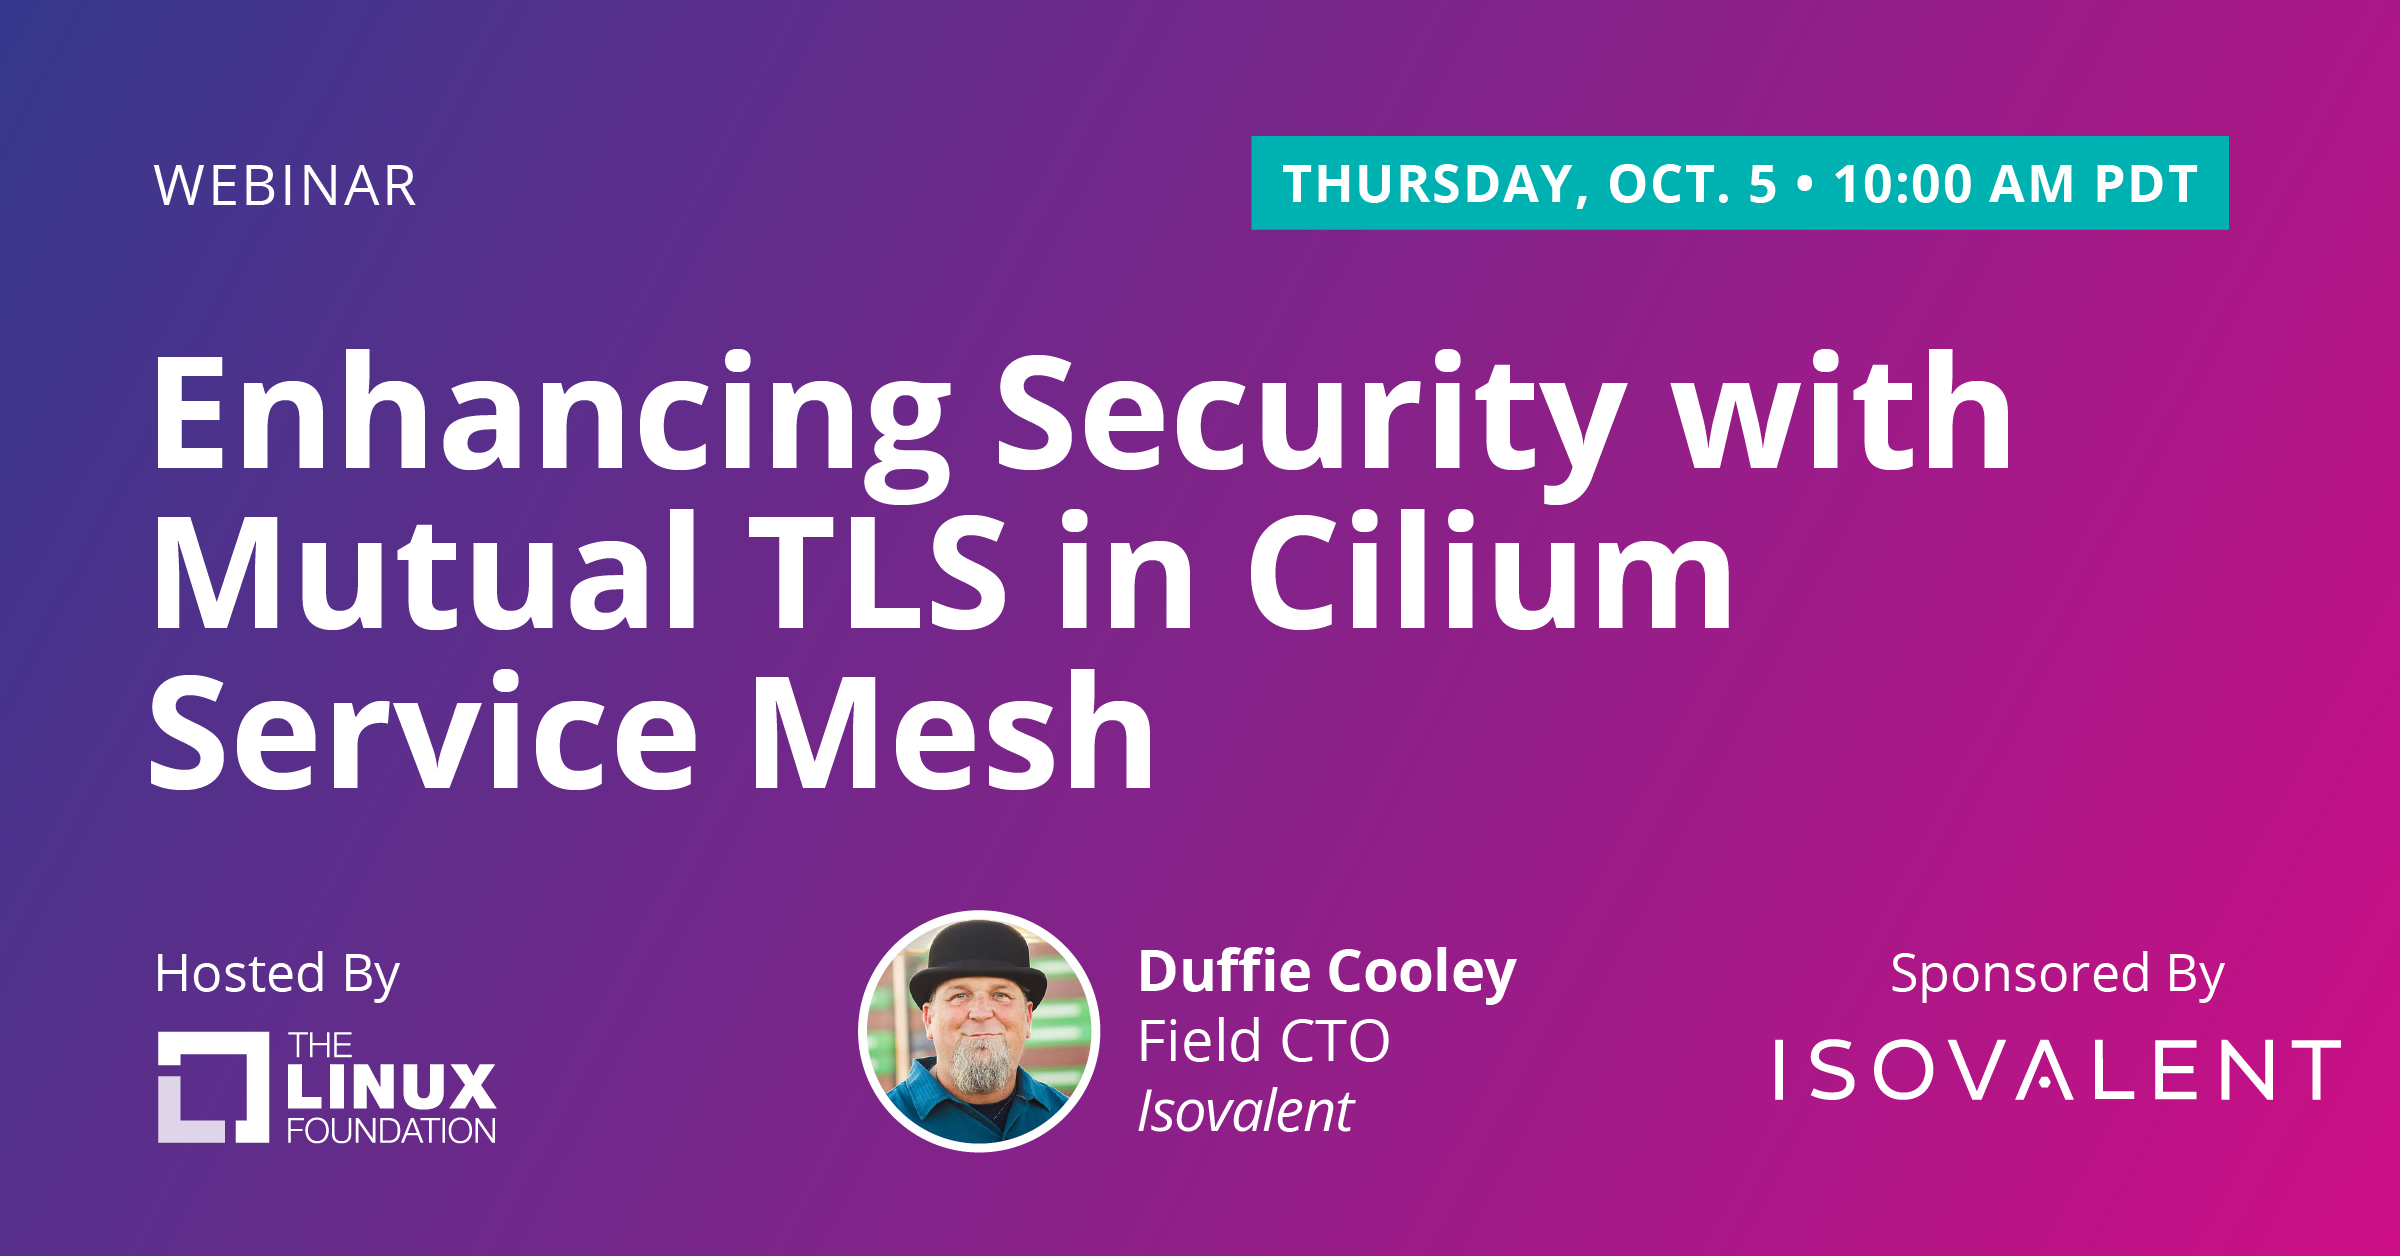 Enhancing Security with Mutual TLS in Cilium Service Mesh featured image